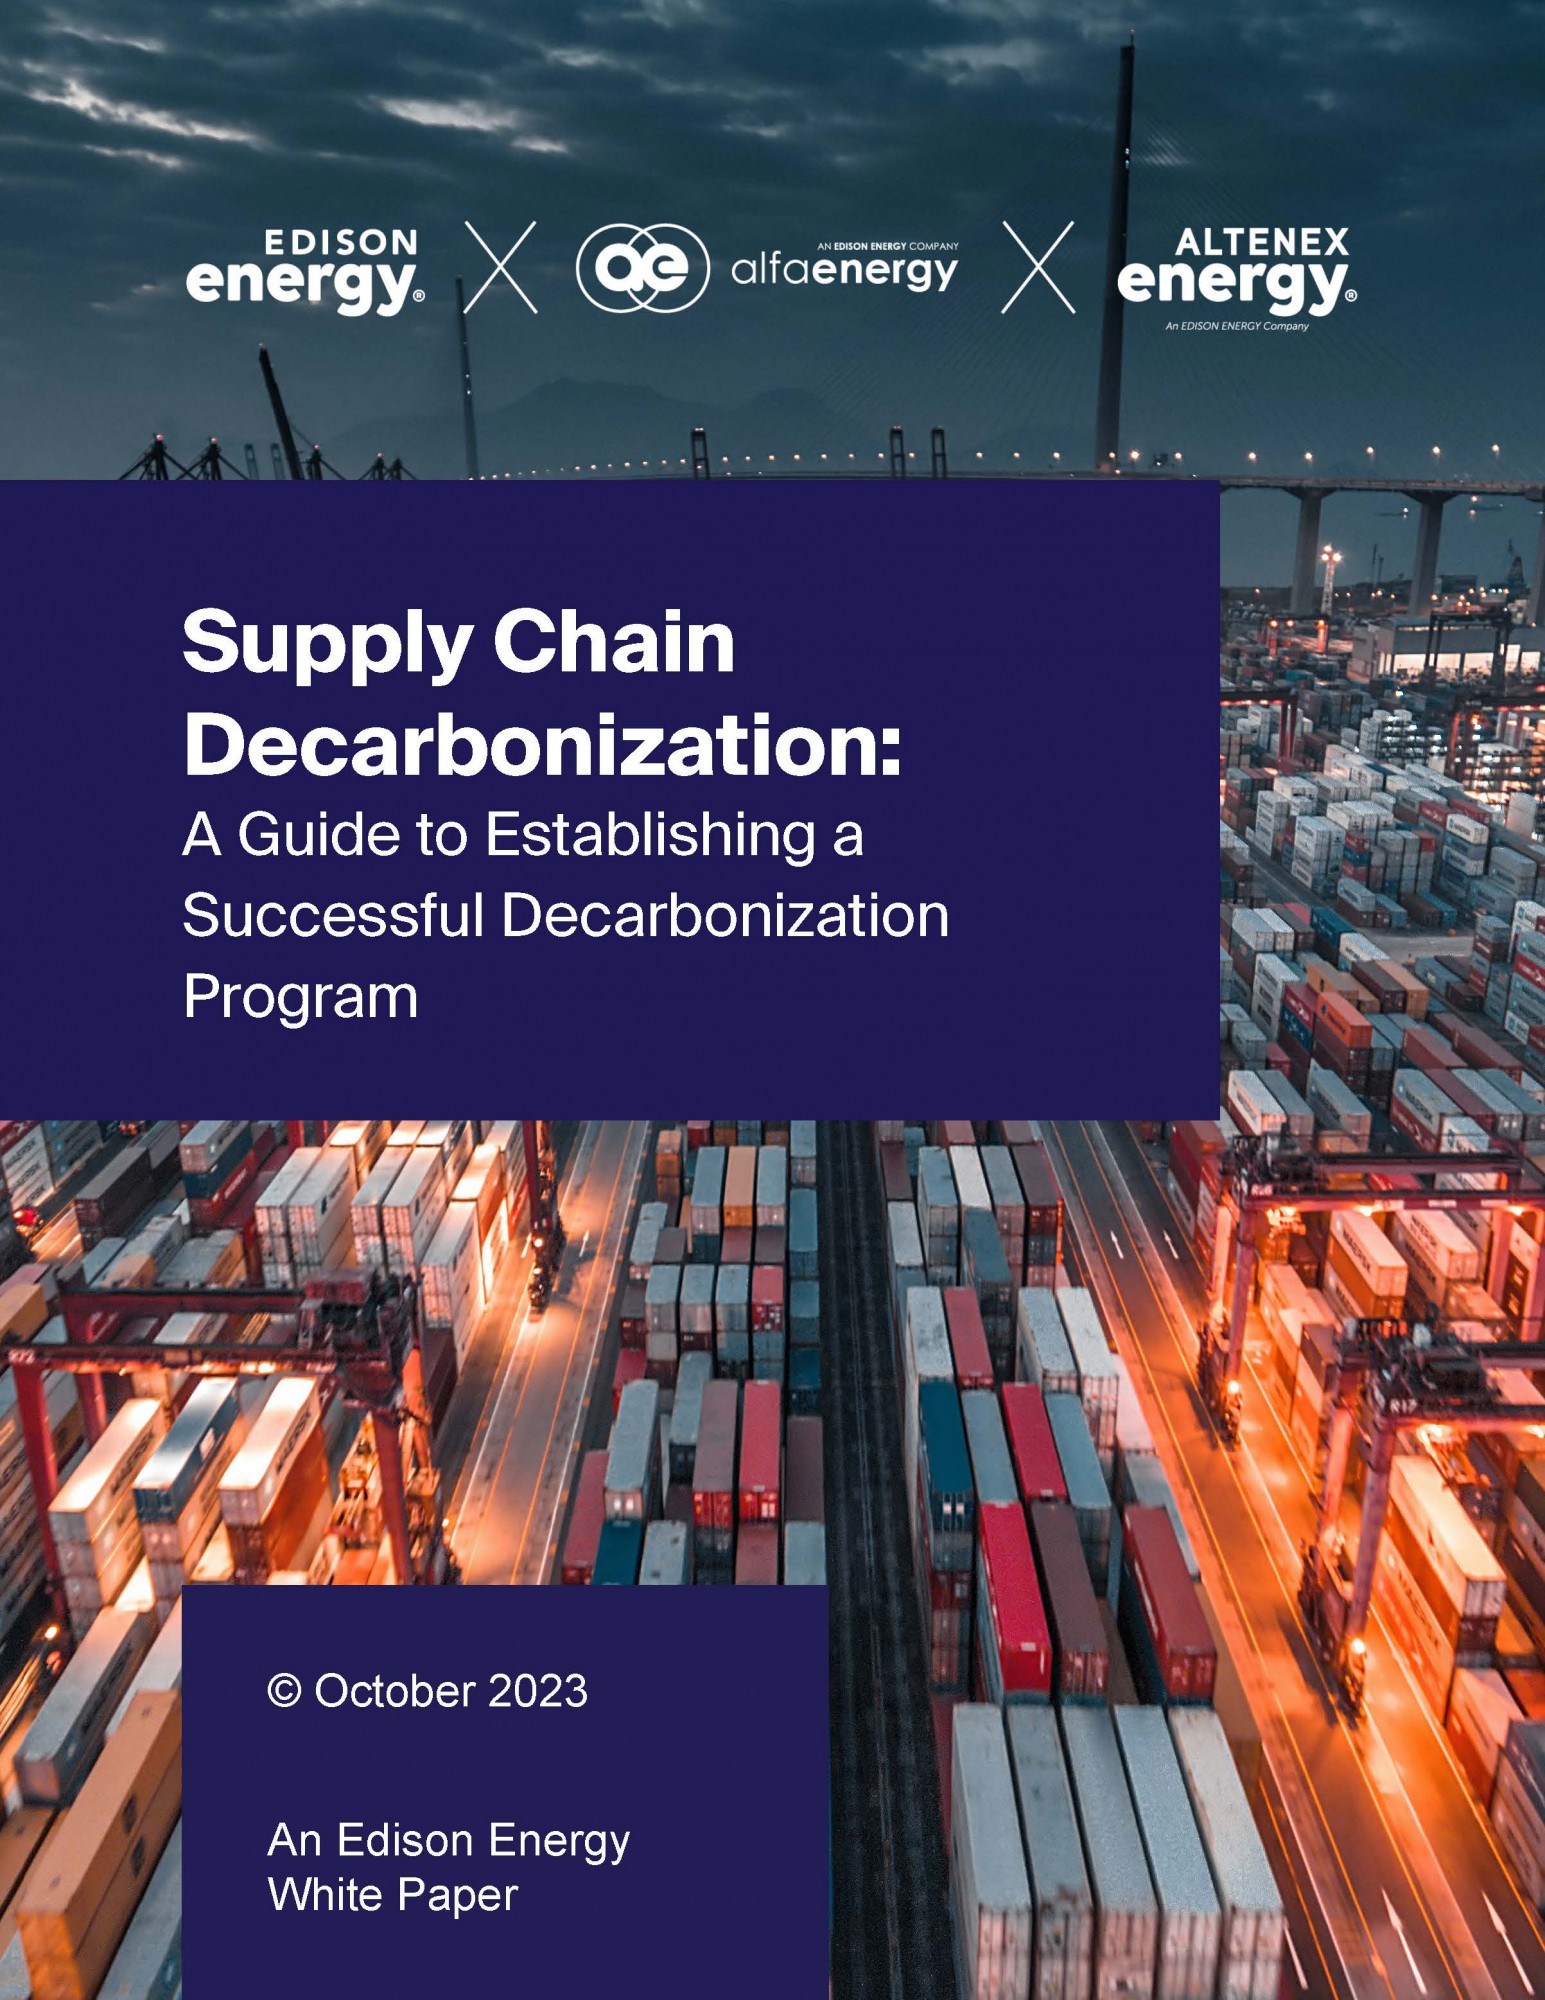 Supply Chain Decarbonization: A Guide to Establishing a Successful Decarbonization Program